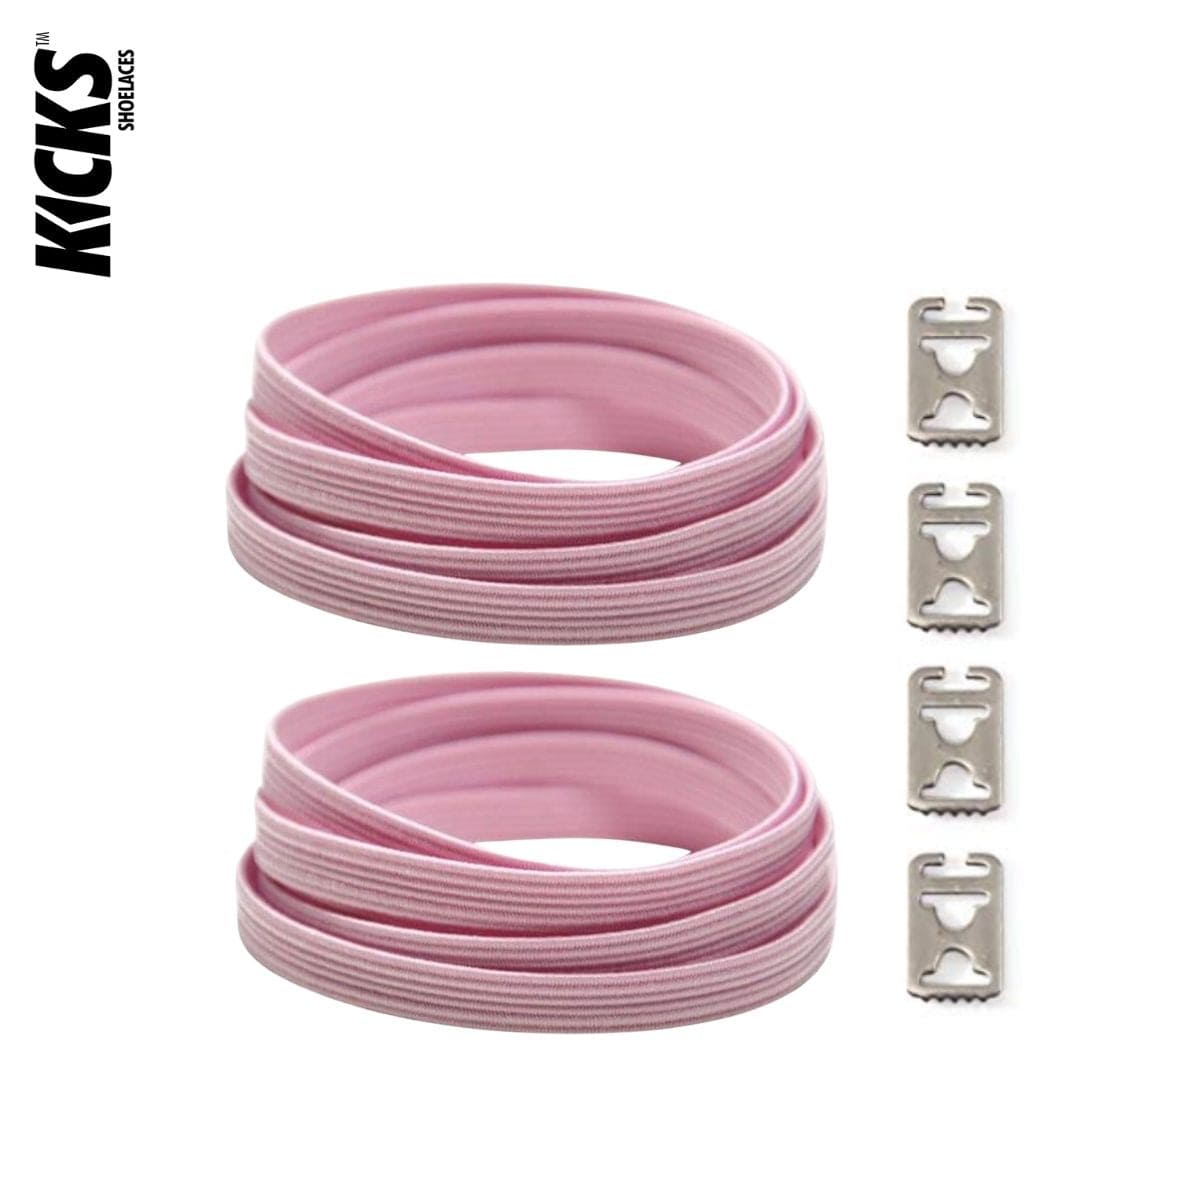 Replacement for Shoe Laces Pink No-Tie Shoelaces